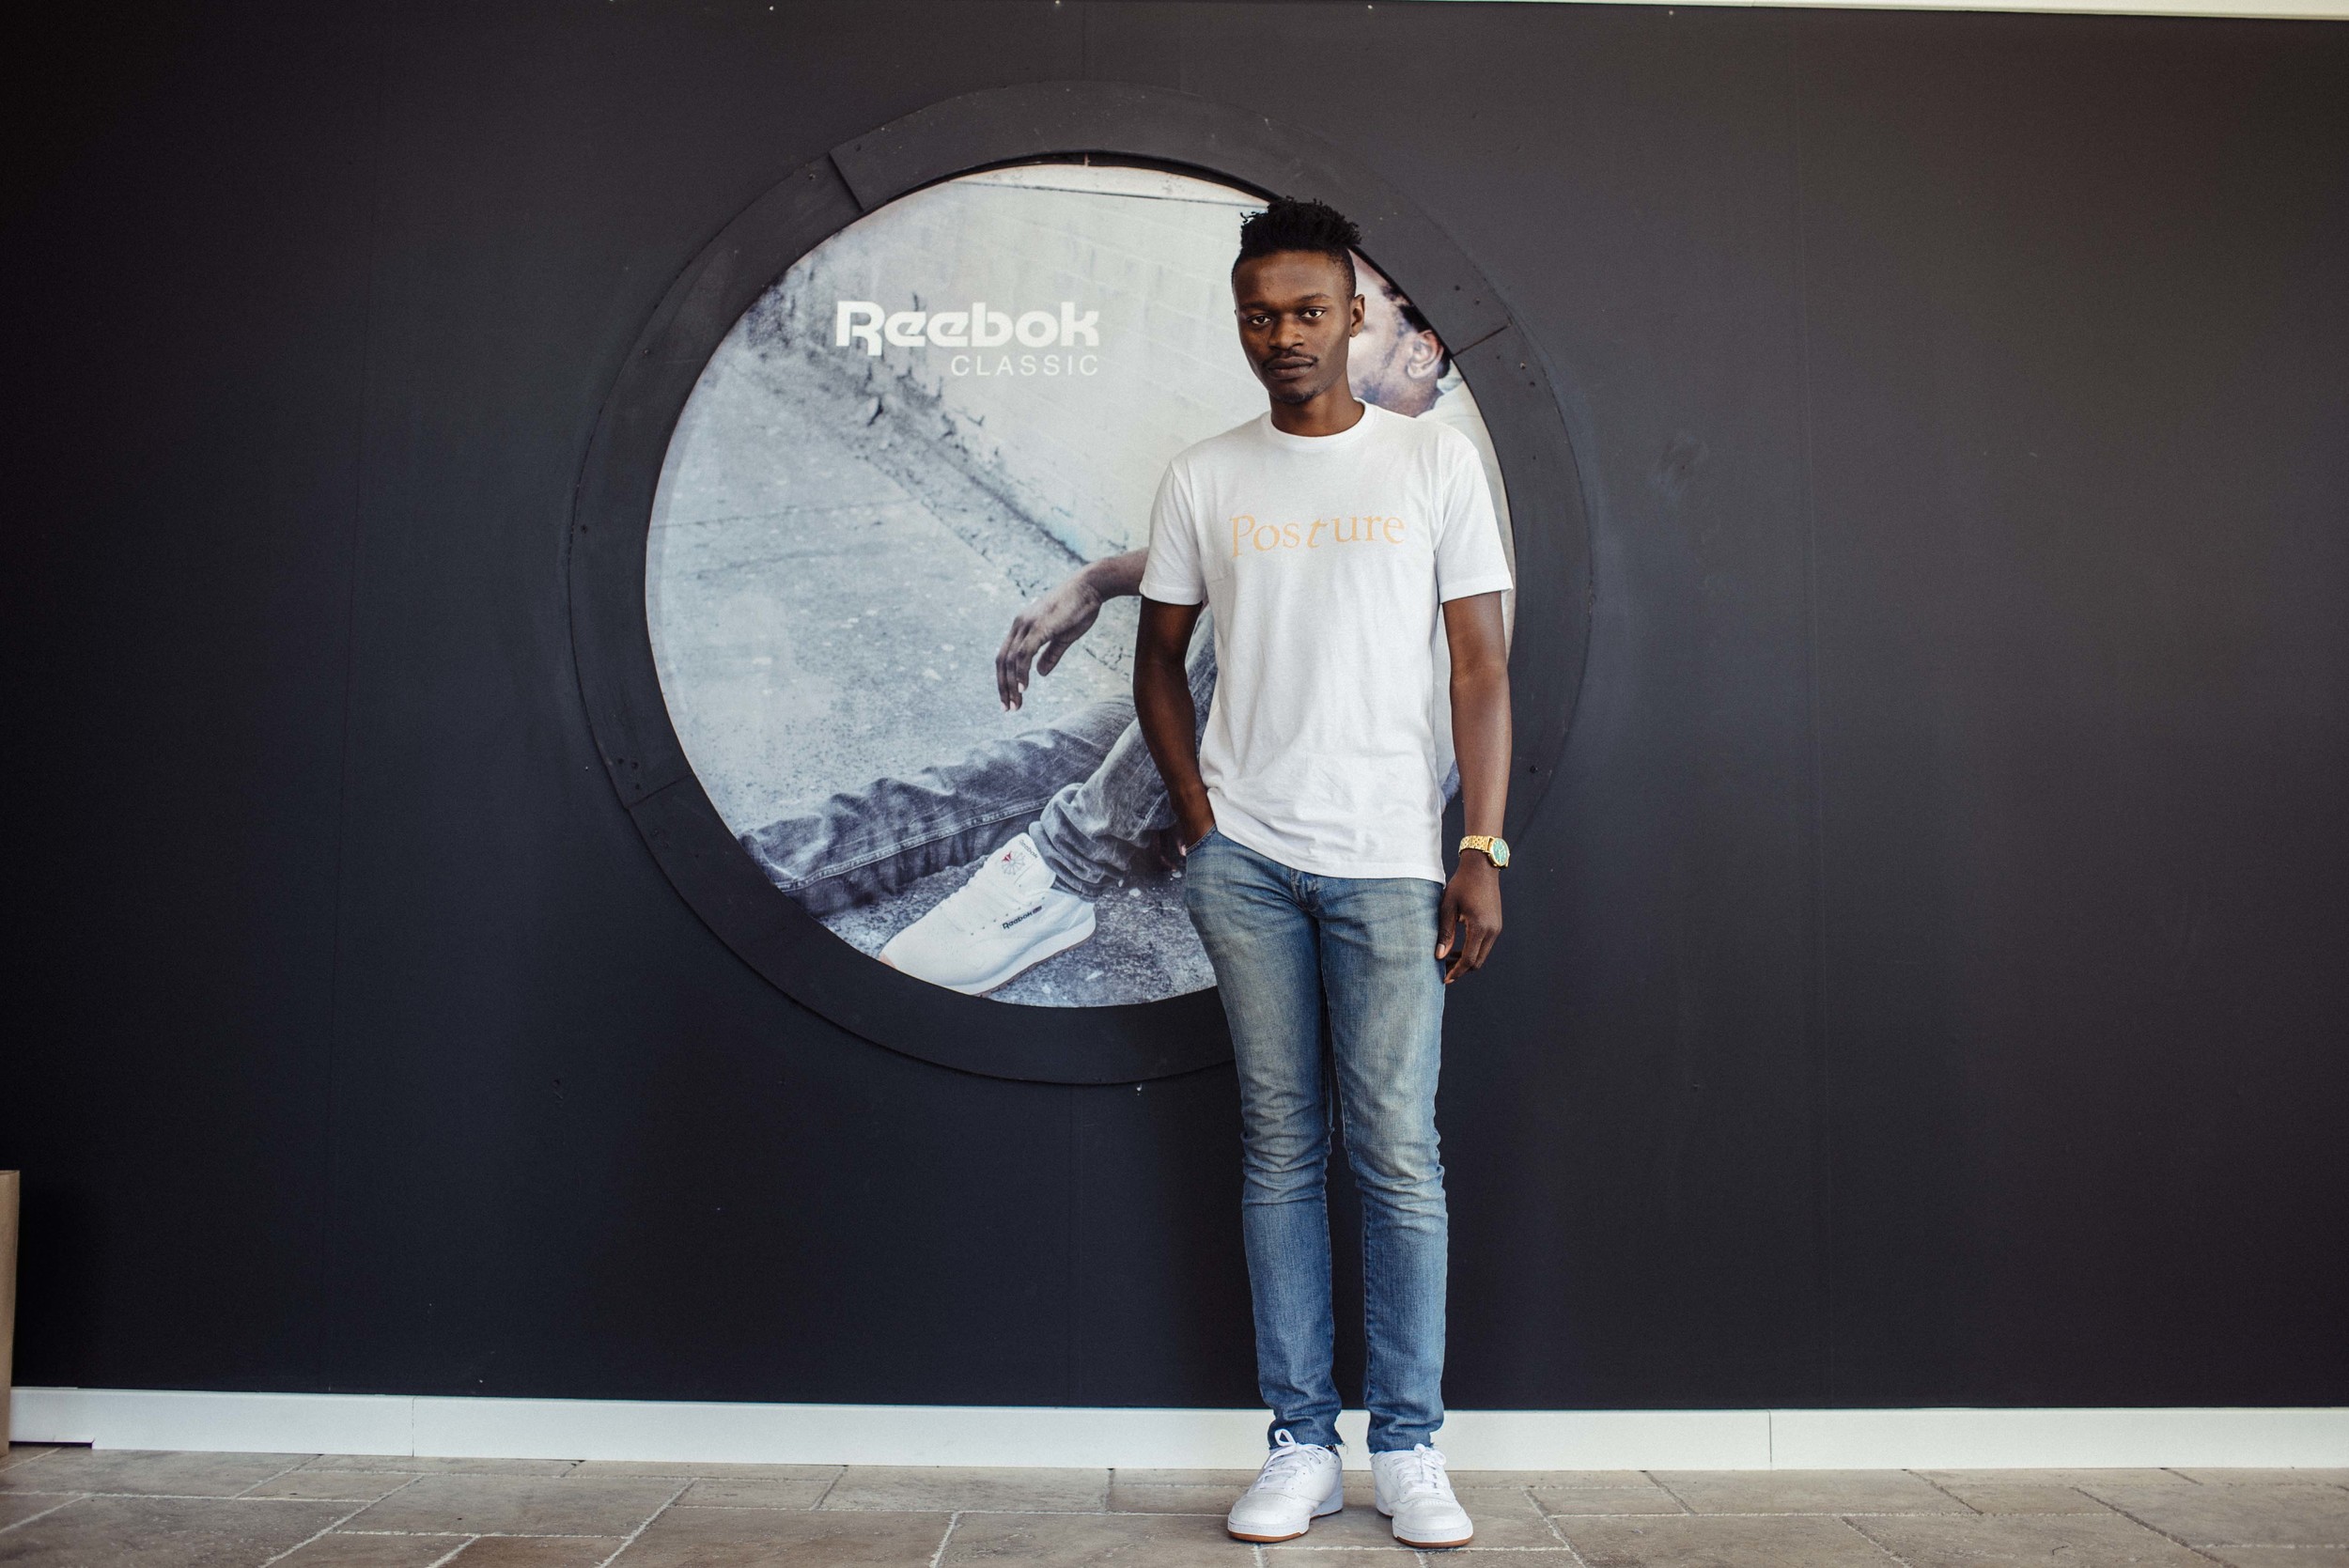  Reebok Classics event in Downtown Los Angeles hosted by Theophilus Martins. / Photo: © Diane Abapo for SUSPEND Magazine. 